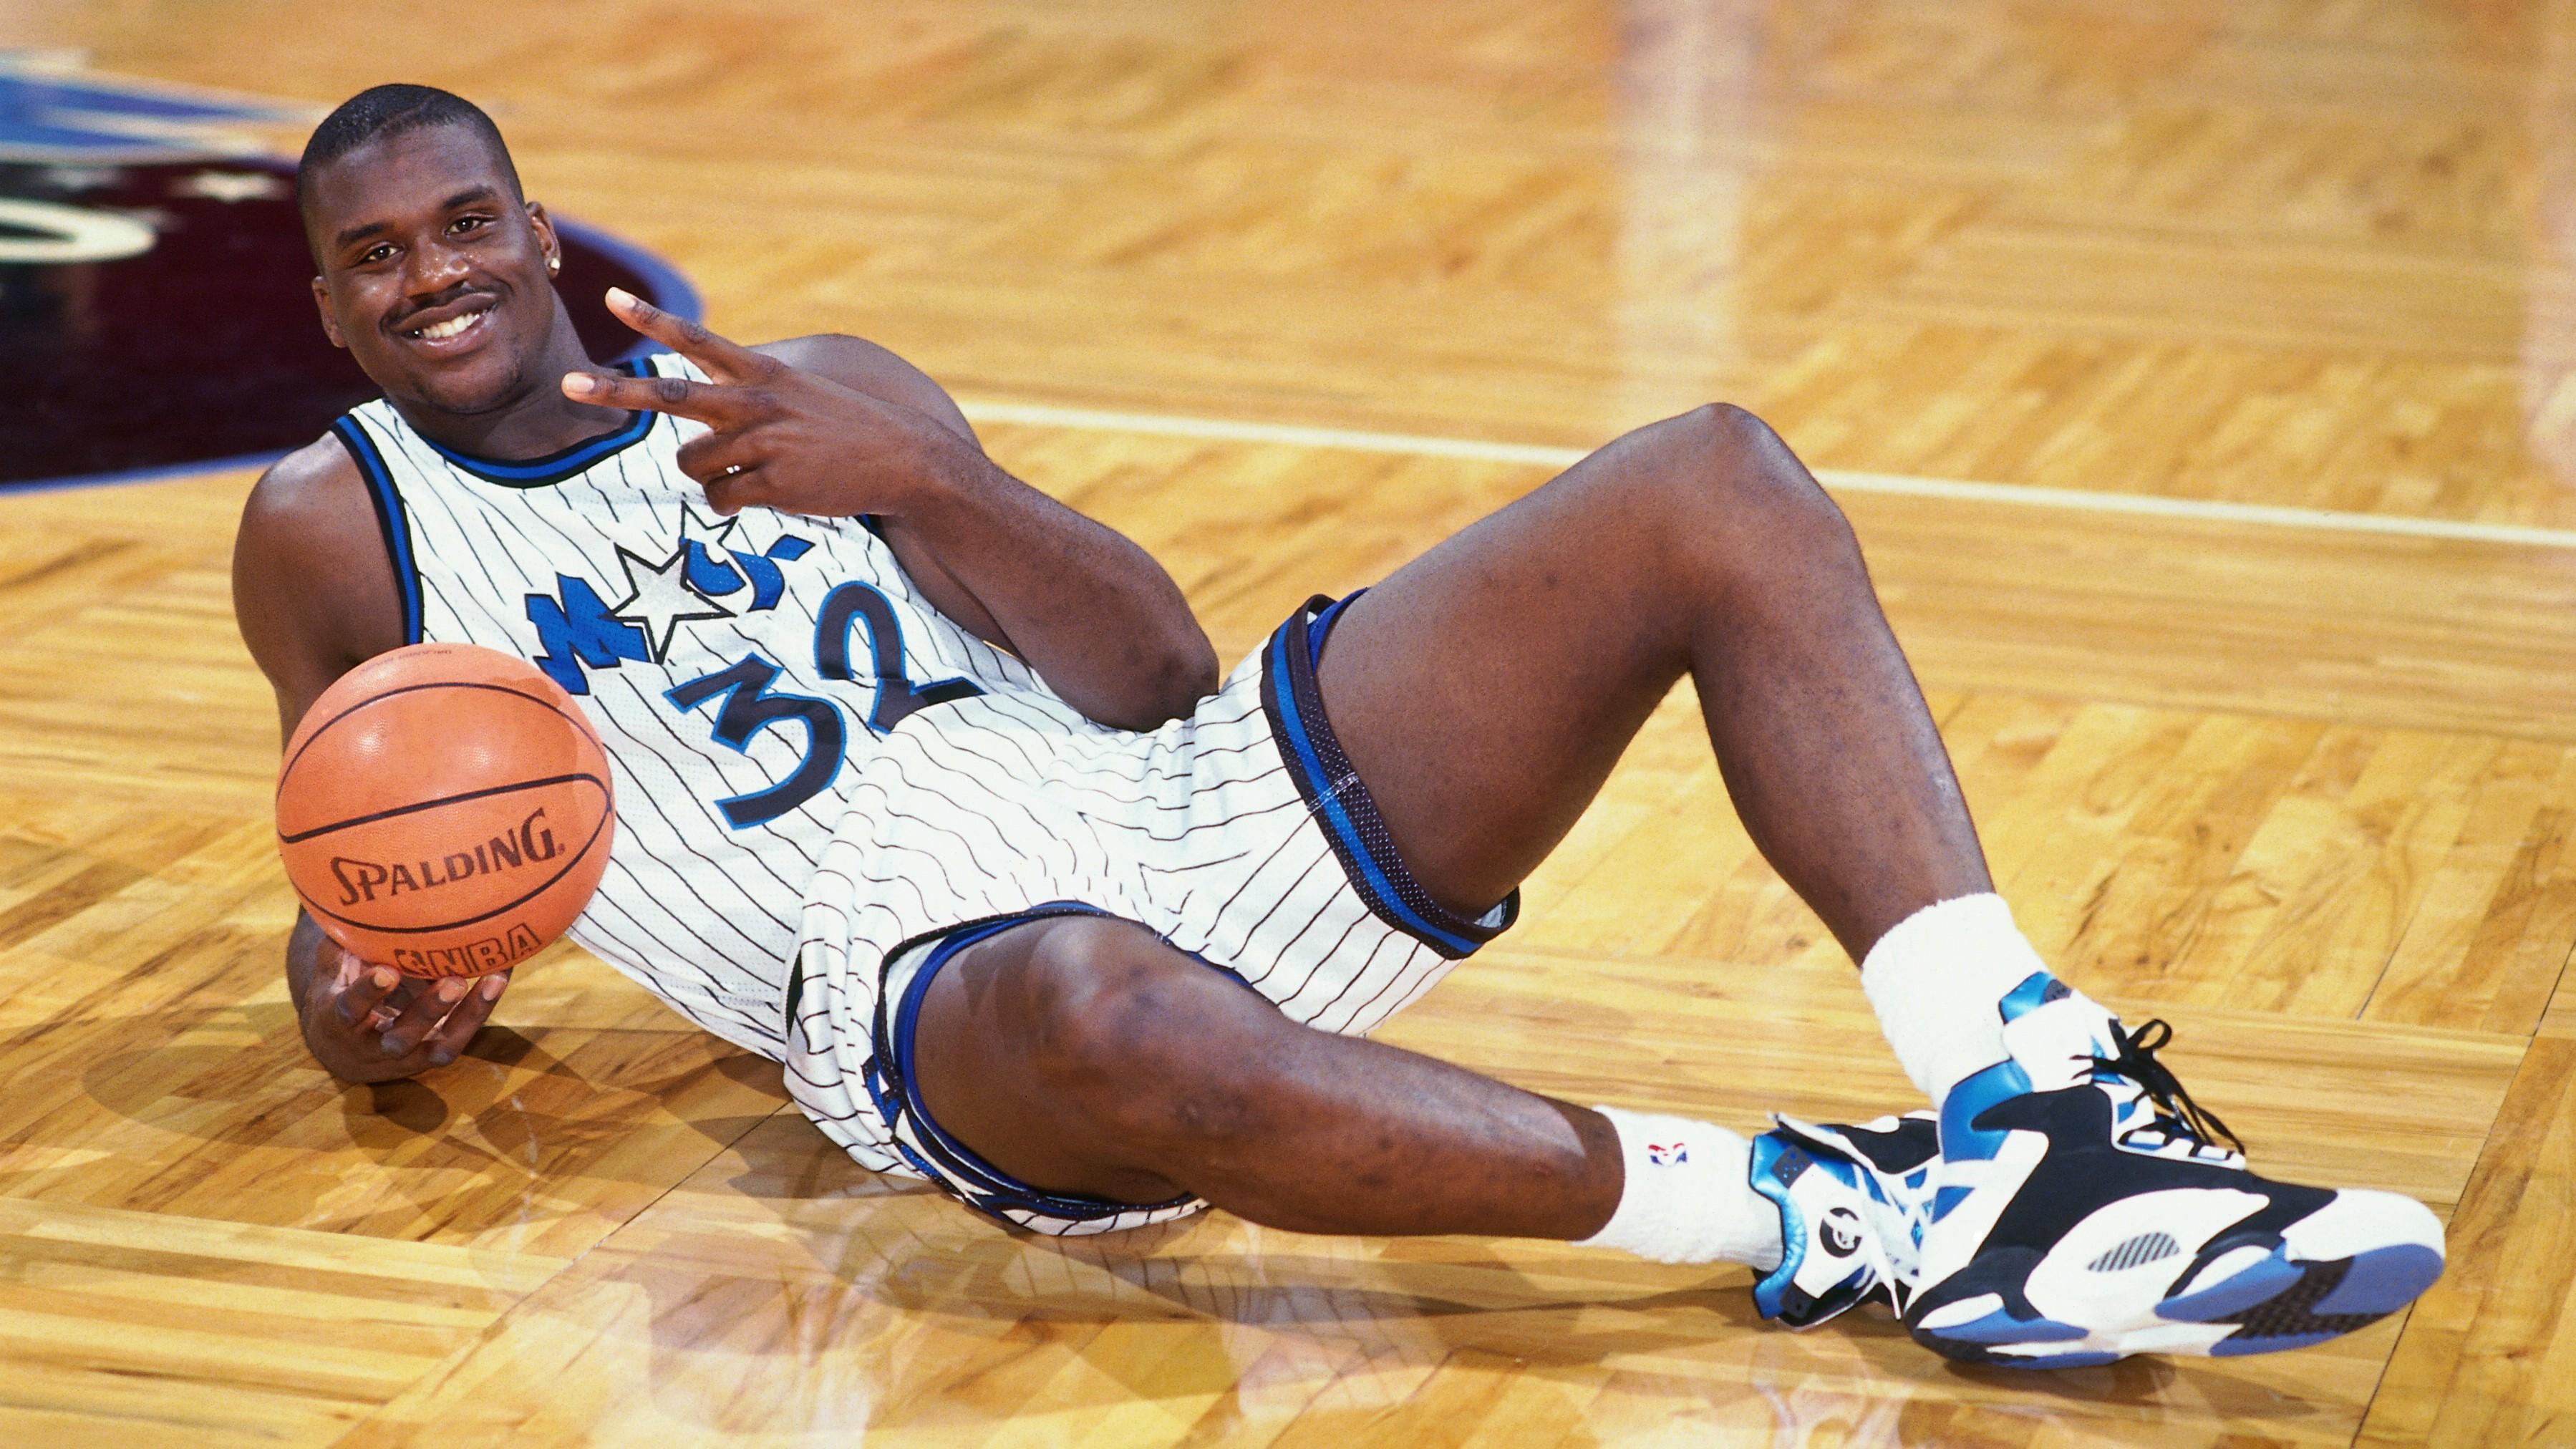 orlando magic to retire shaquille o'neal's no. 32 jersey at ceremony in february